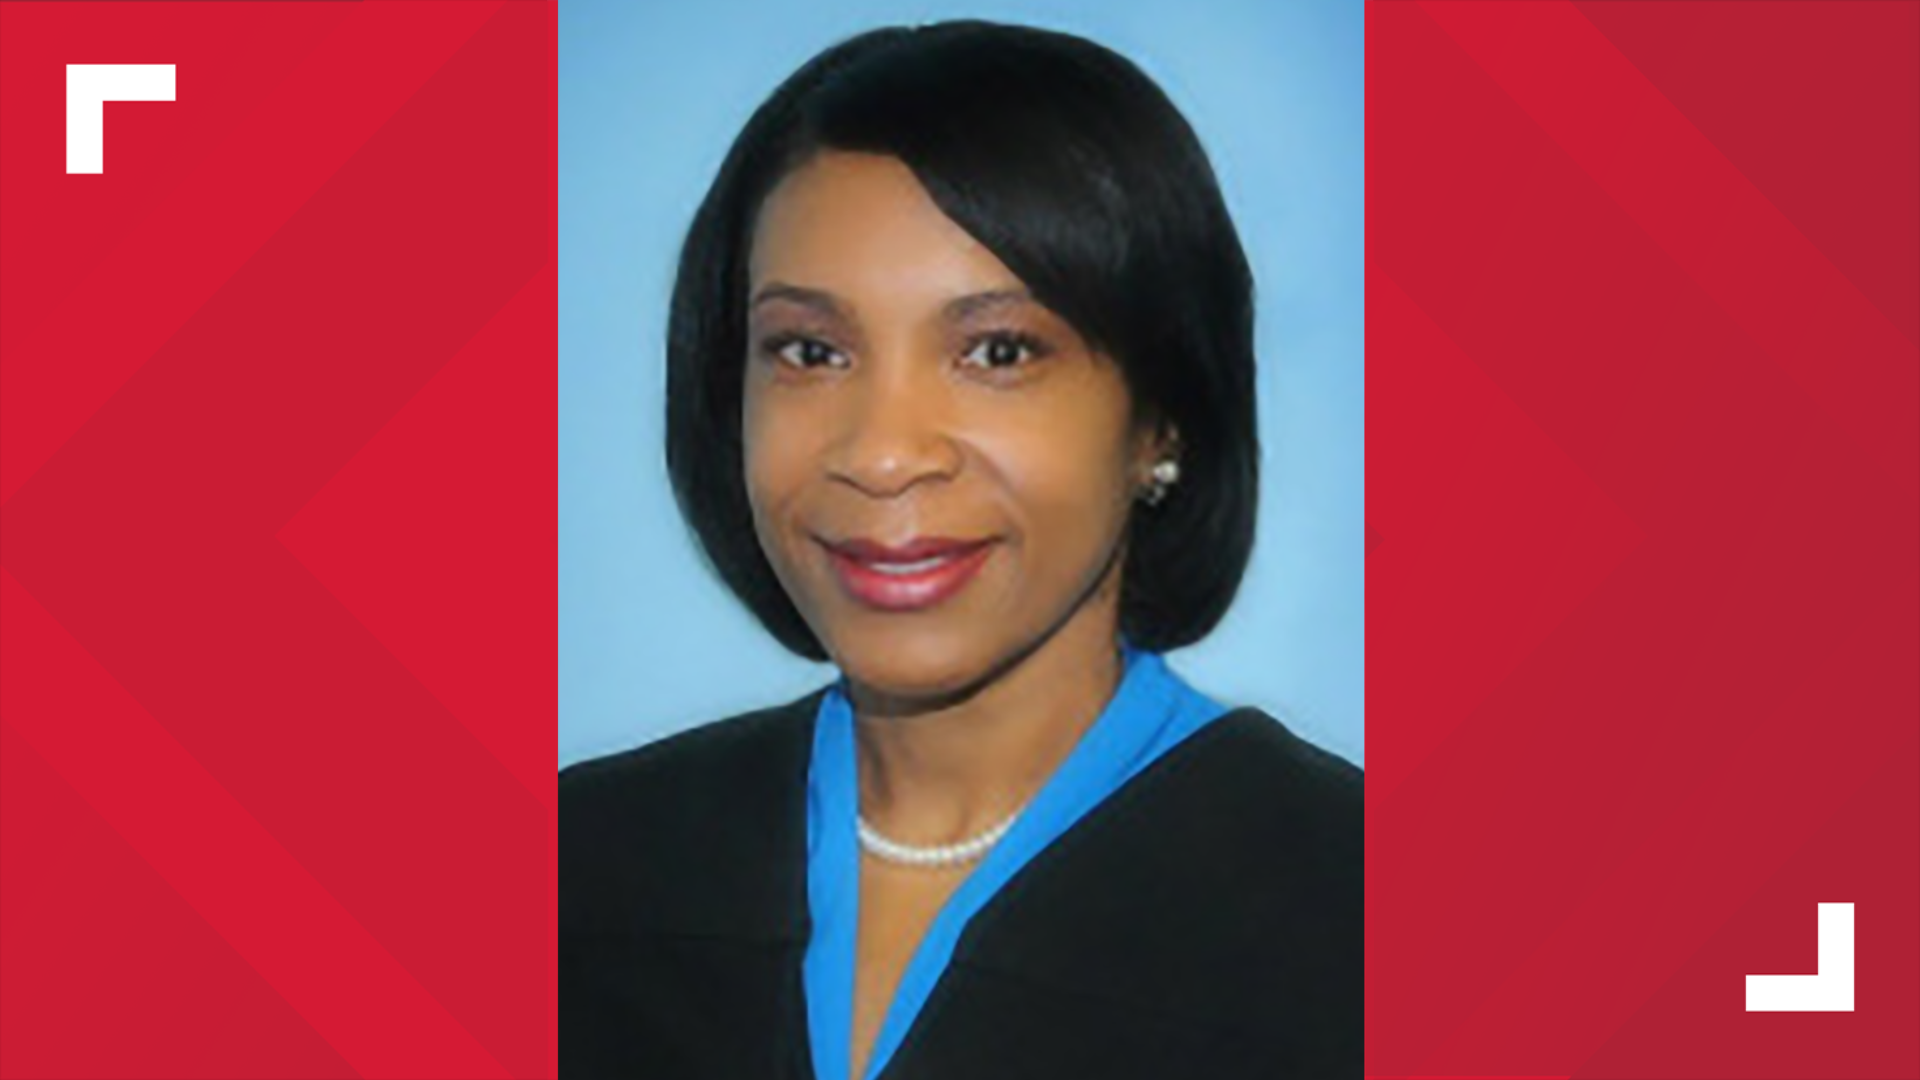 Keva Landrum served as interim DA for the city of New Orleans in 2007, after the resignation of Eddie Jordan.